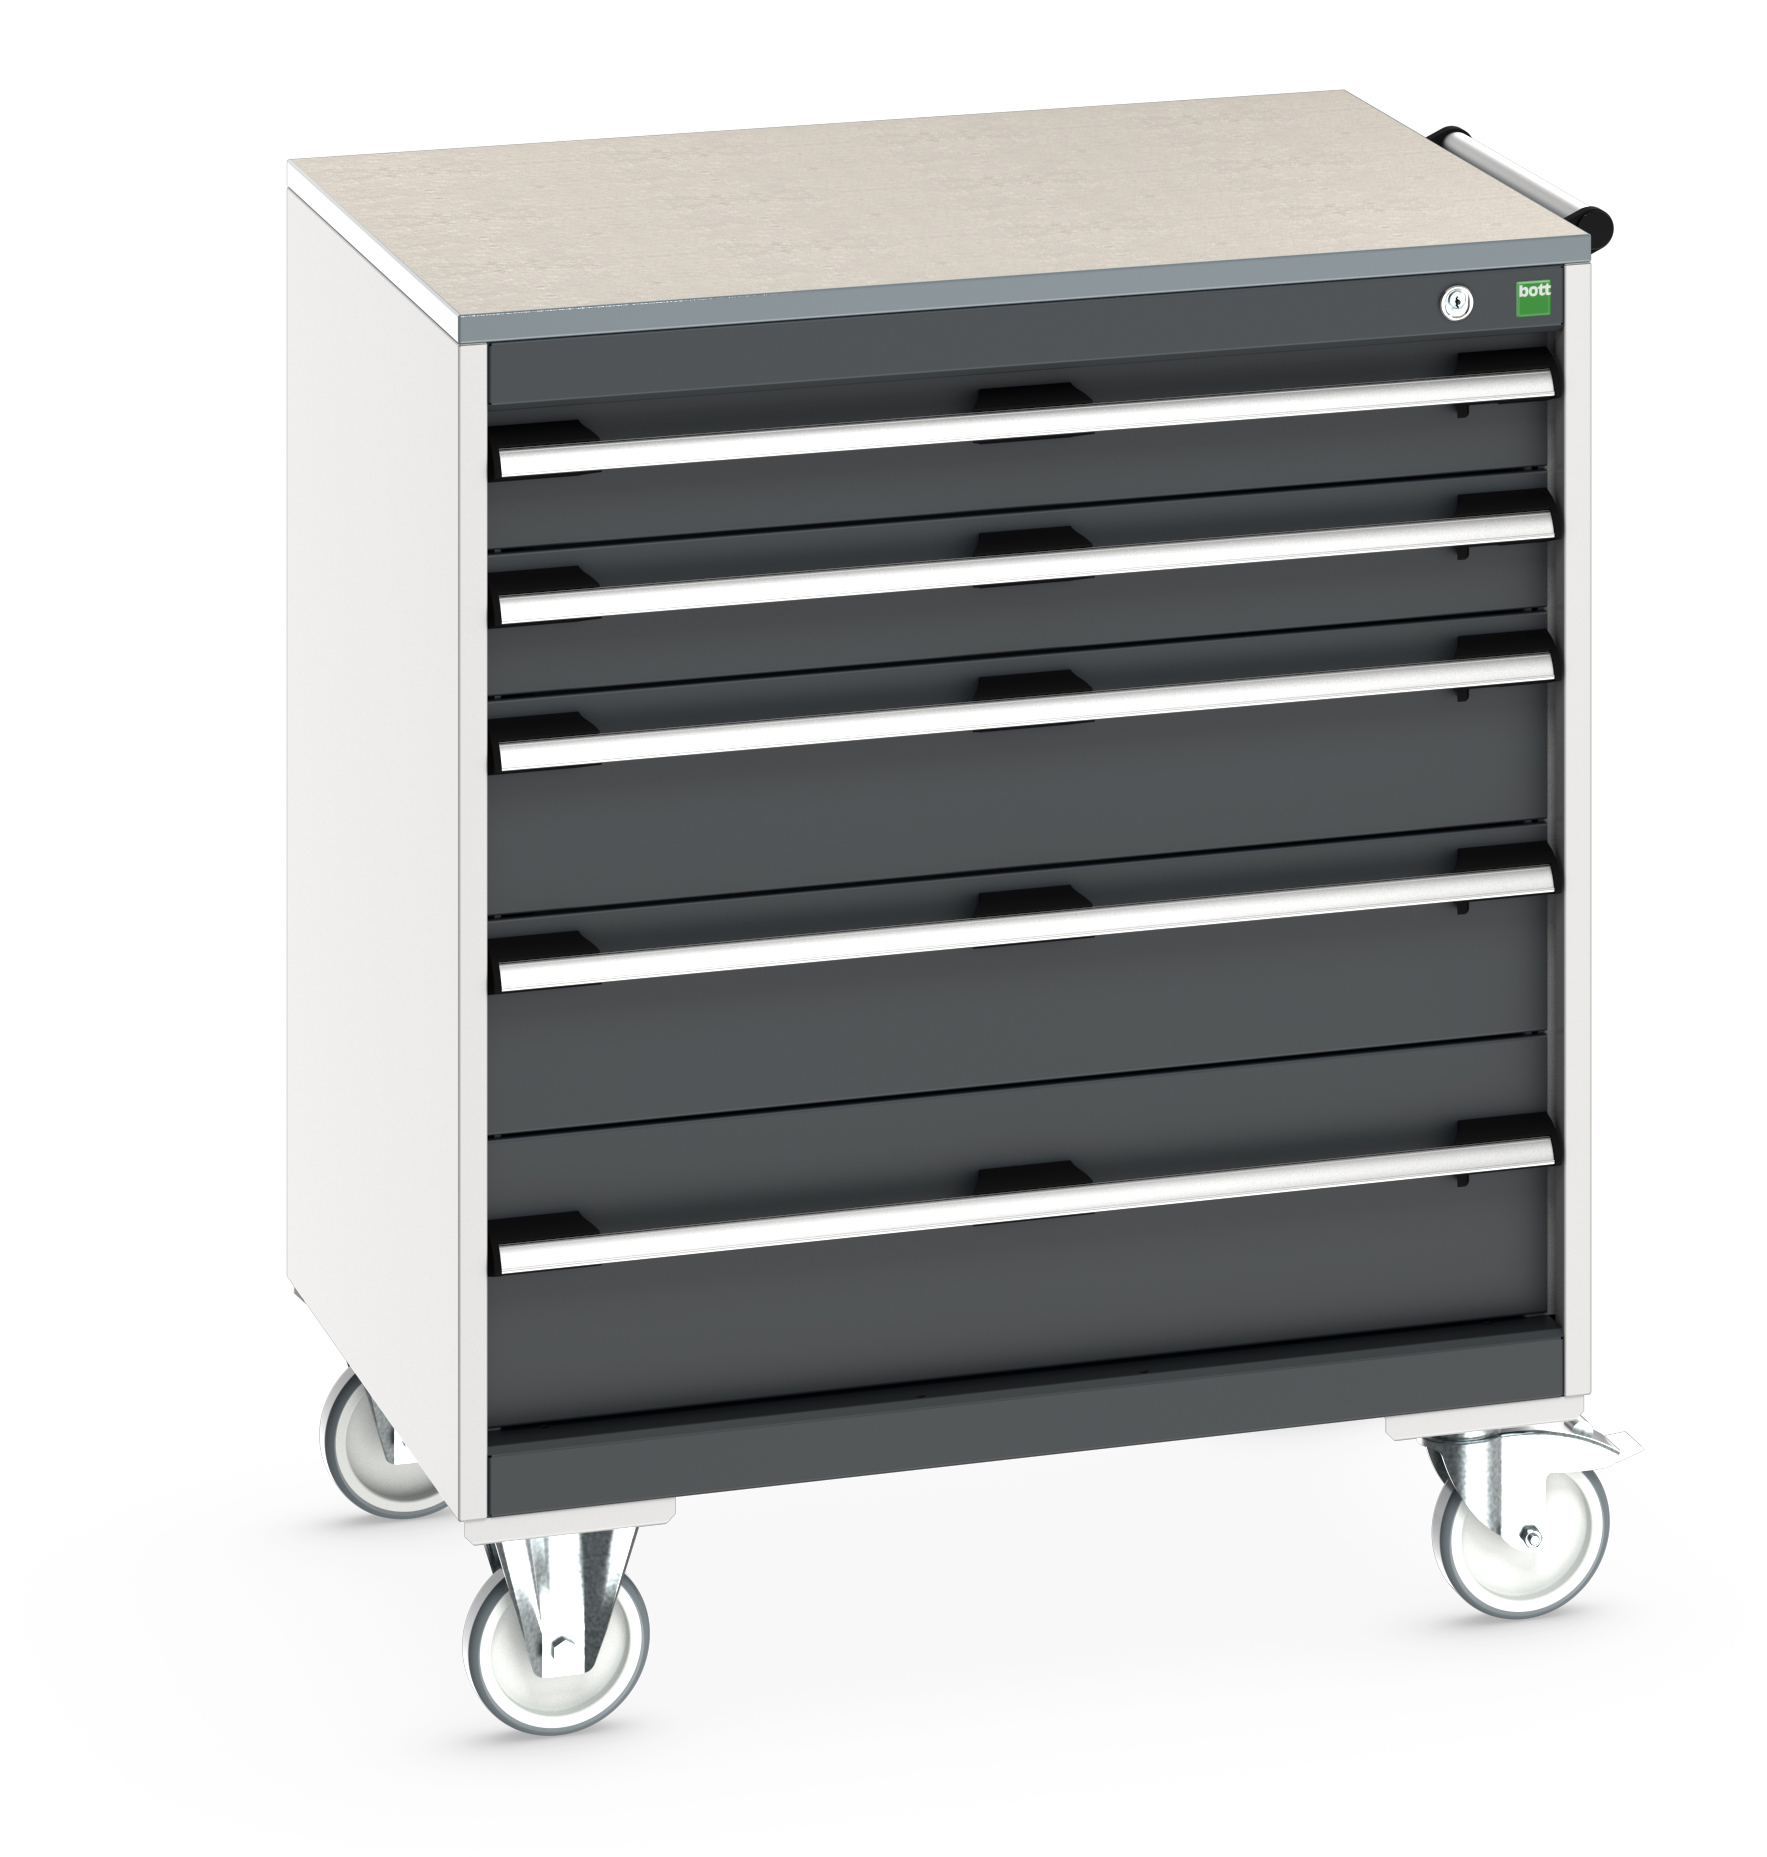 Bott Cubio Mobile Drawer Cabinet With 5 Drawers & Lino Worktop - 40402158.19V